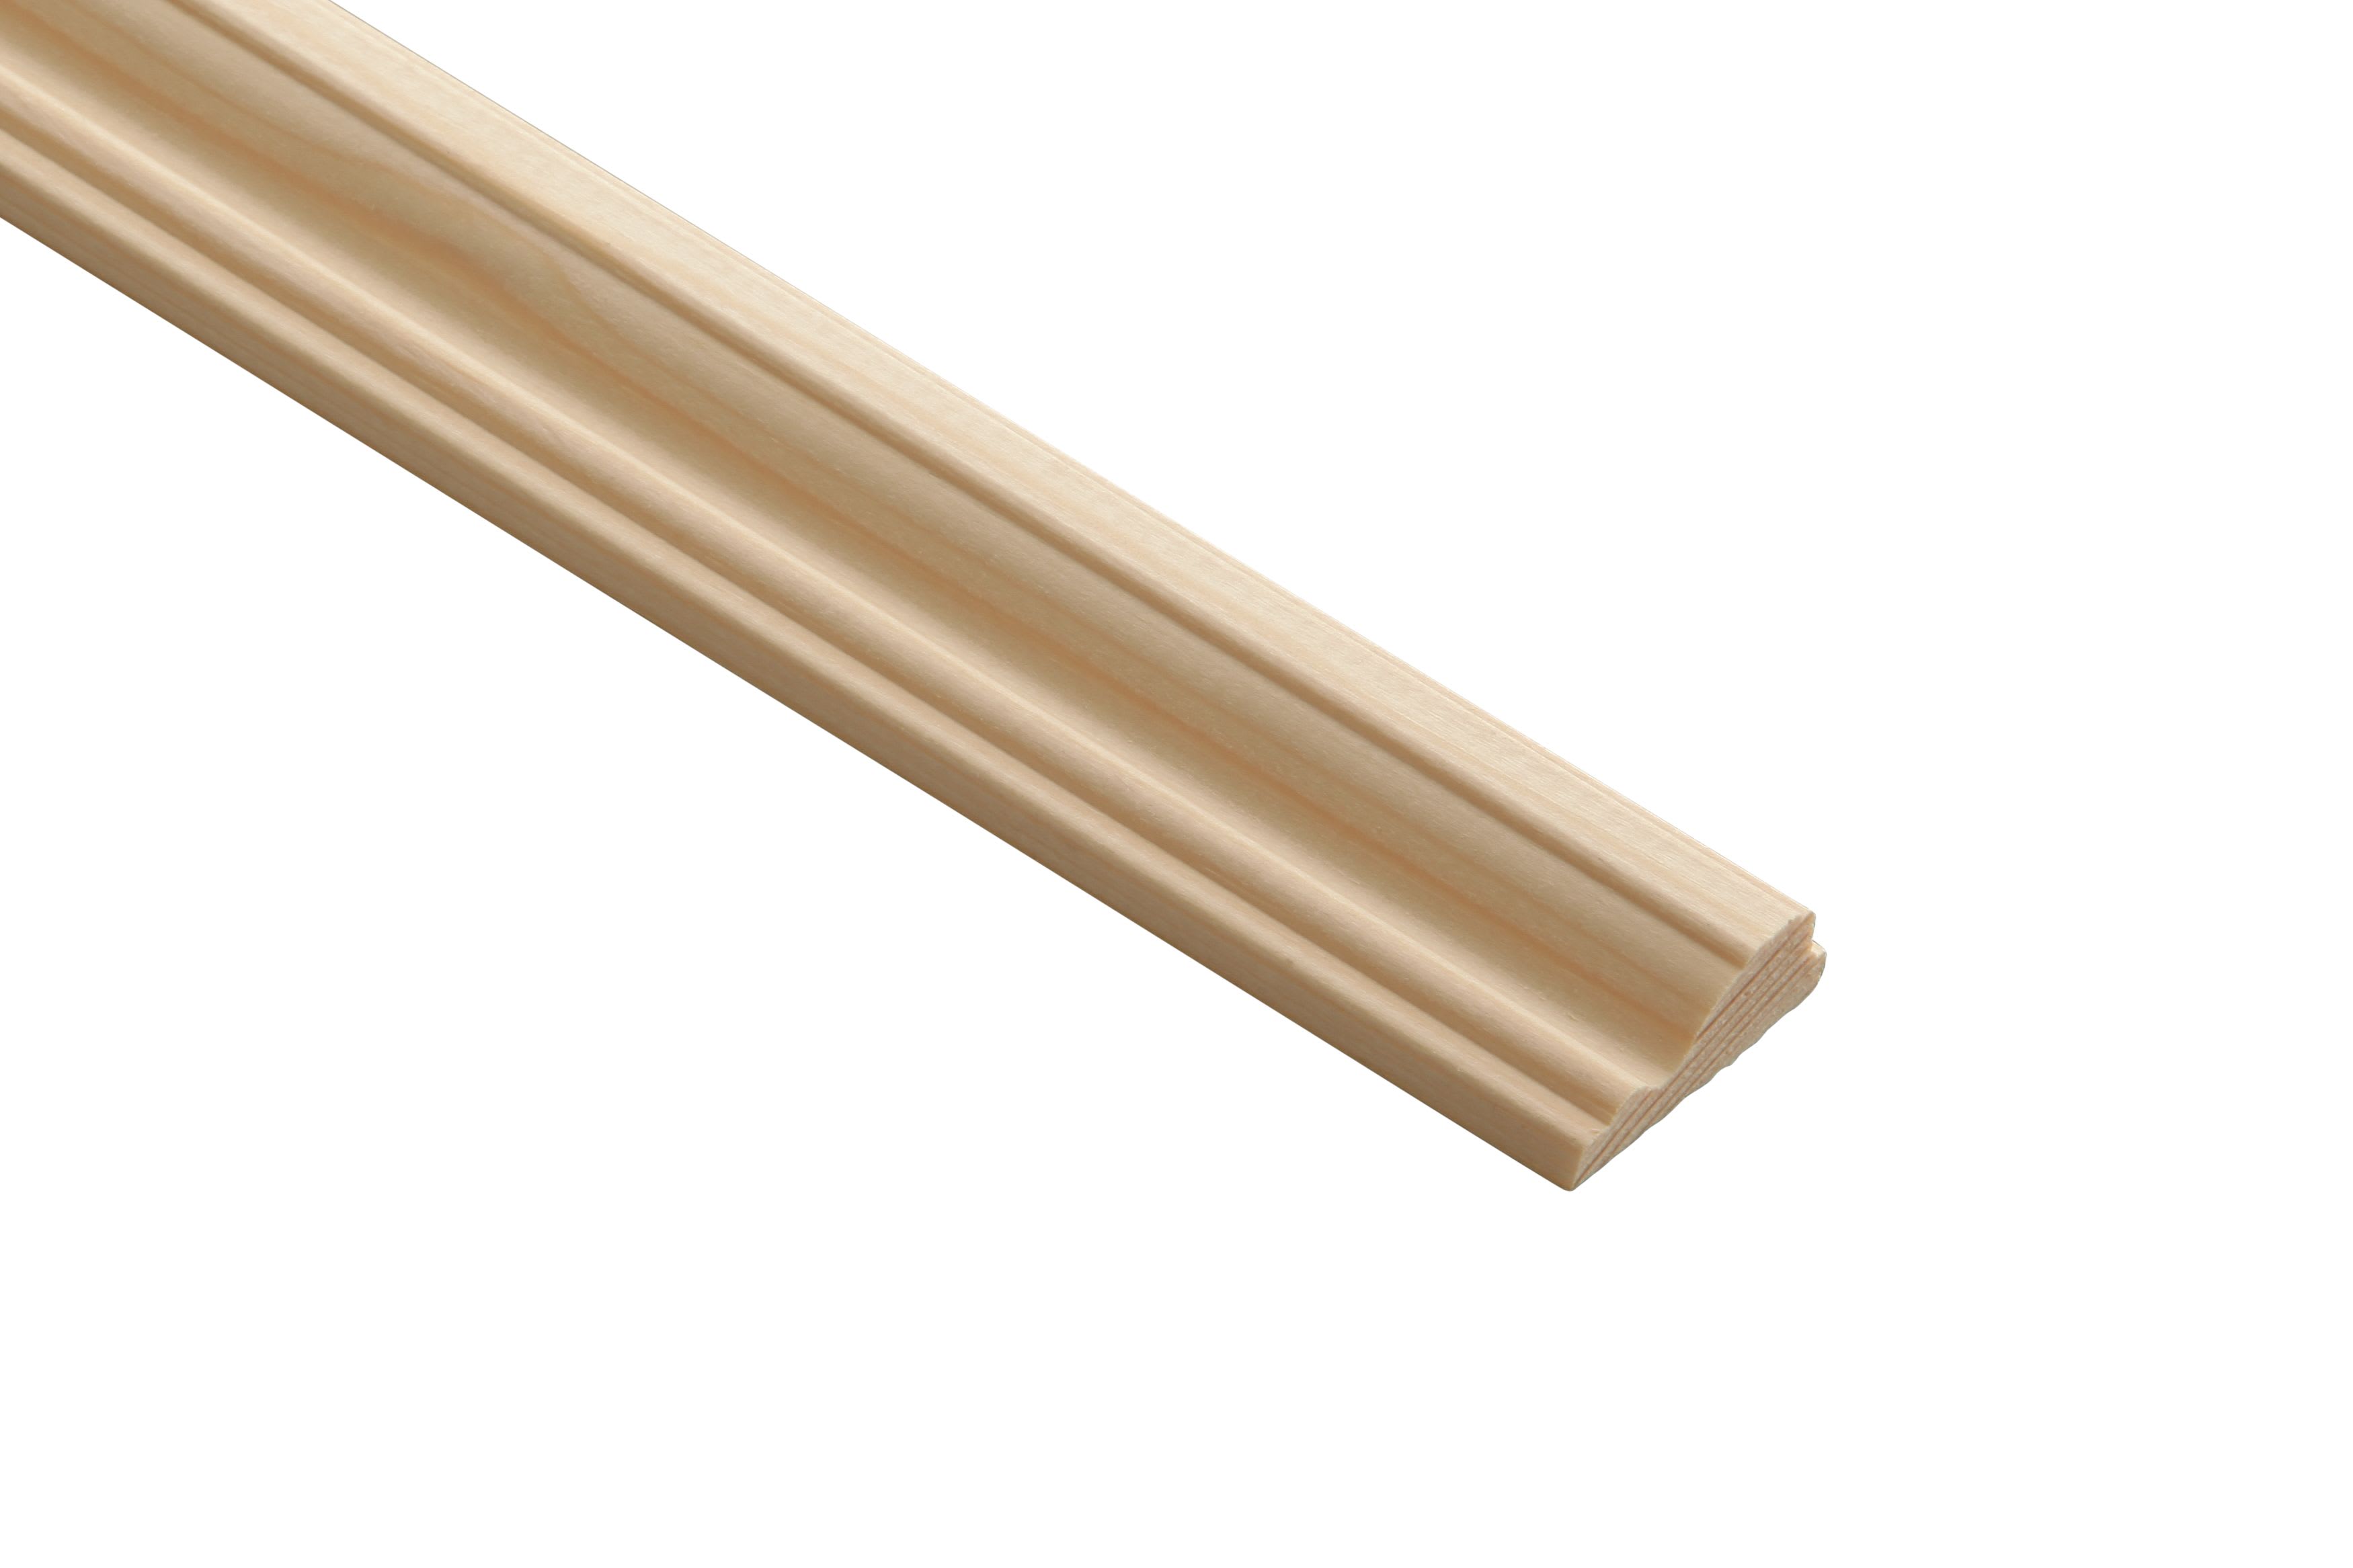 Wickes Pine Decorative Cover Moulding - 12 x